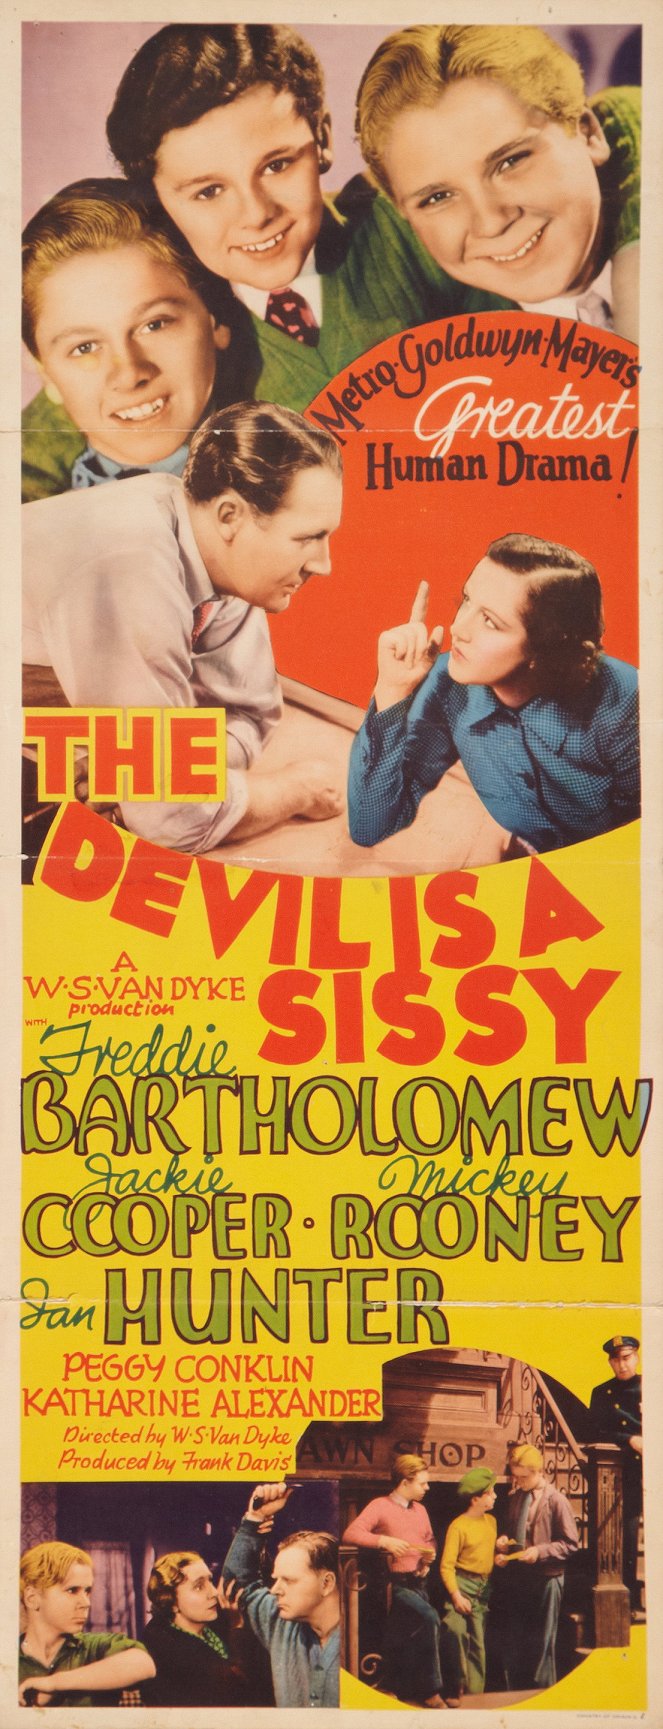 The Devil Is a Sissy - Affiches